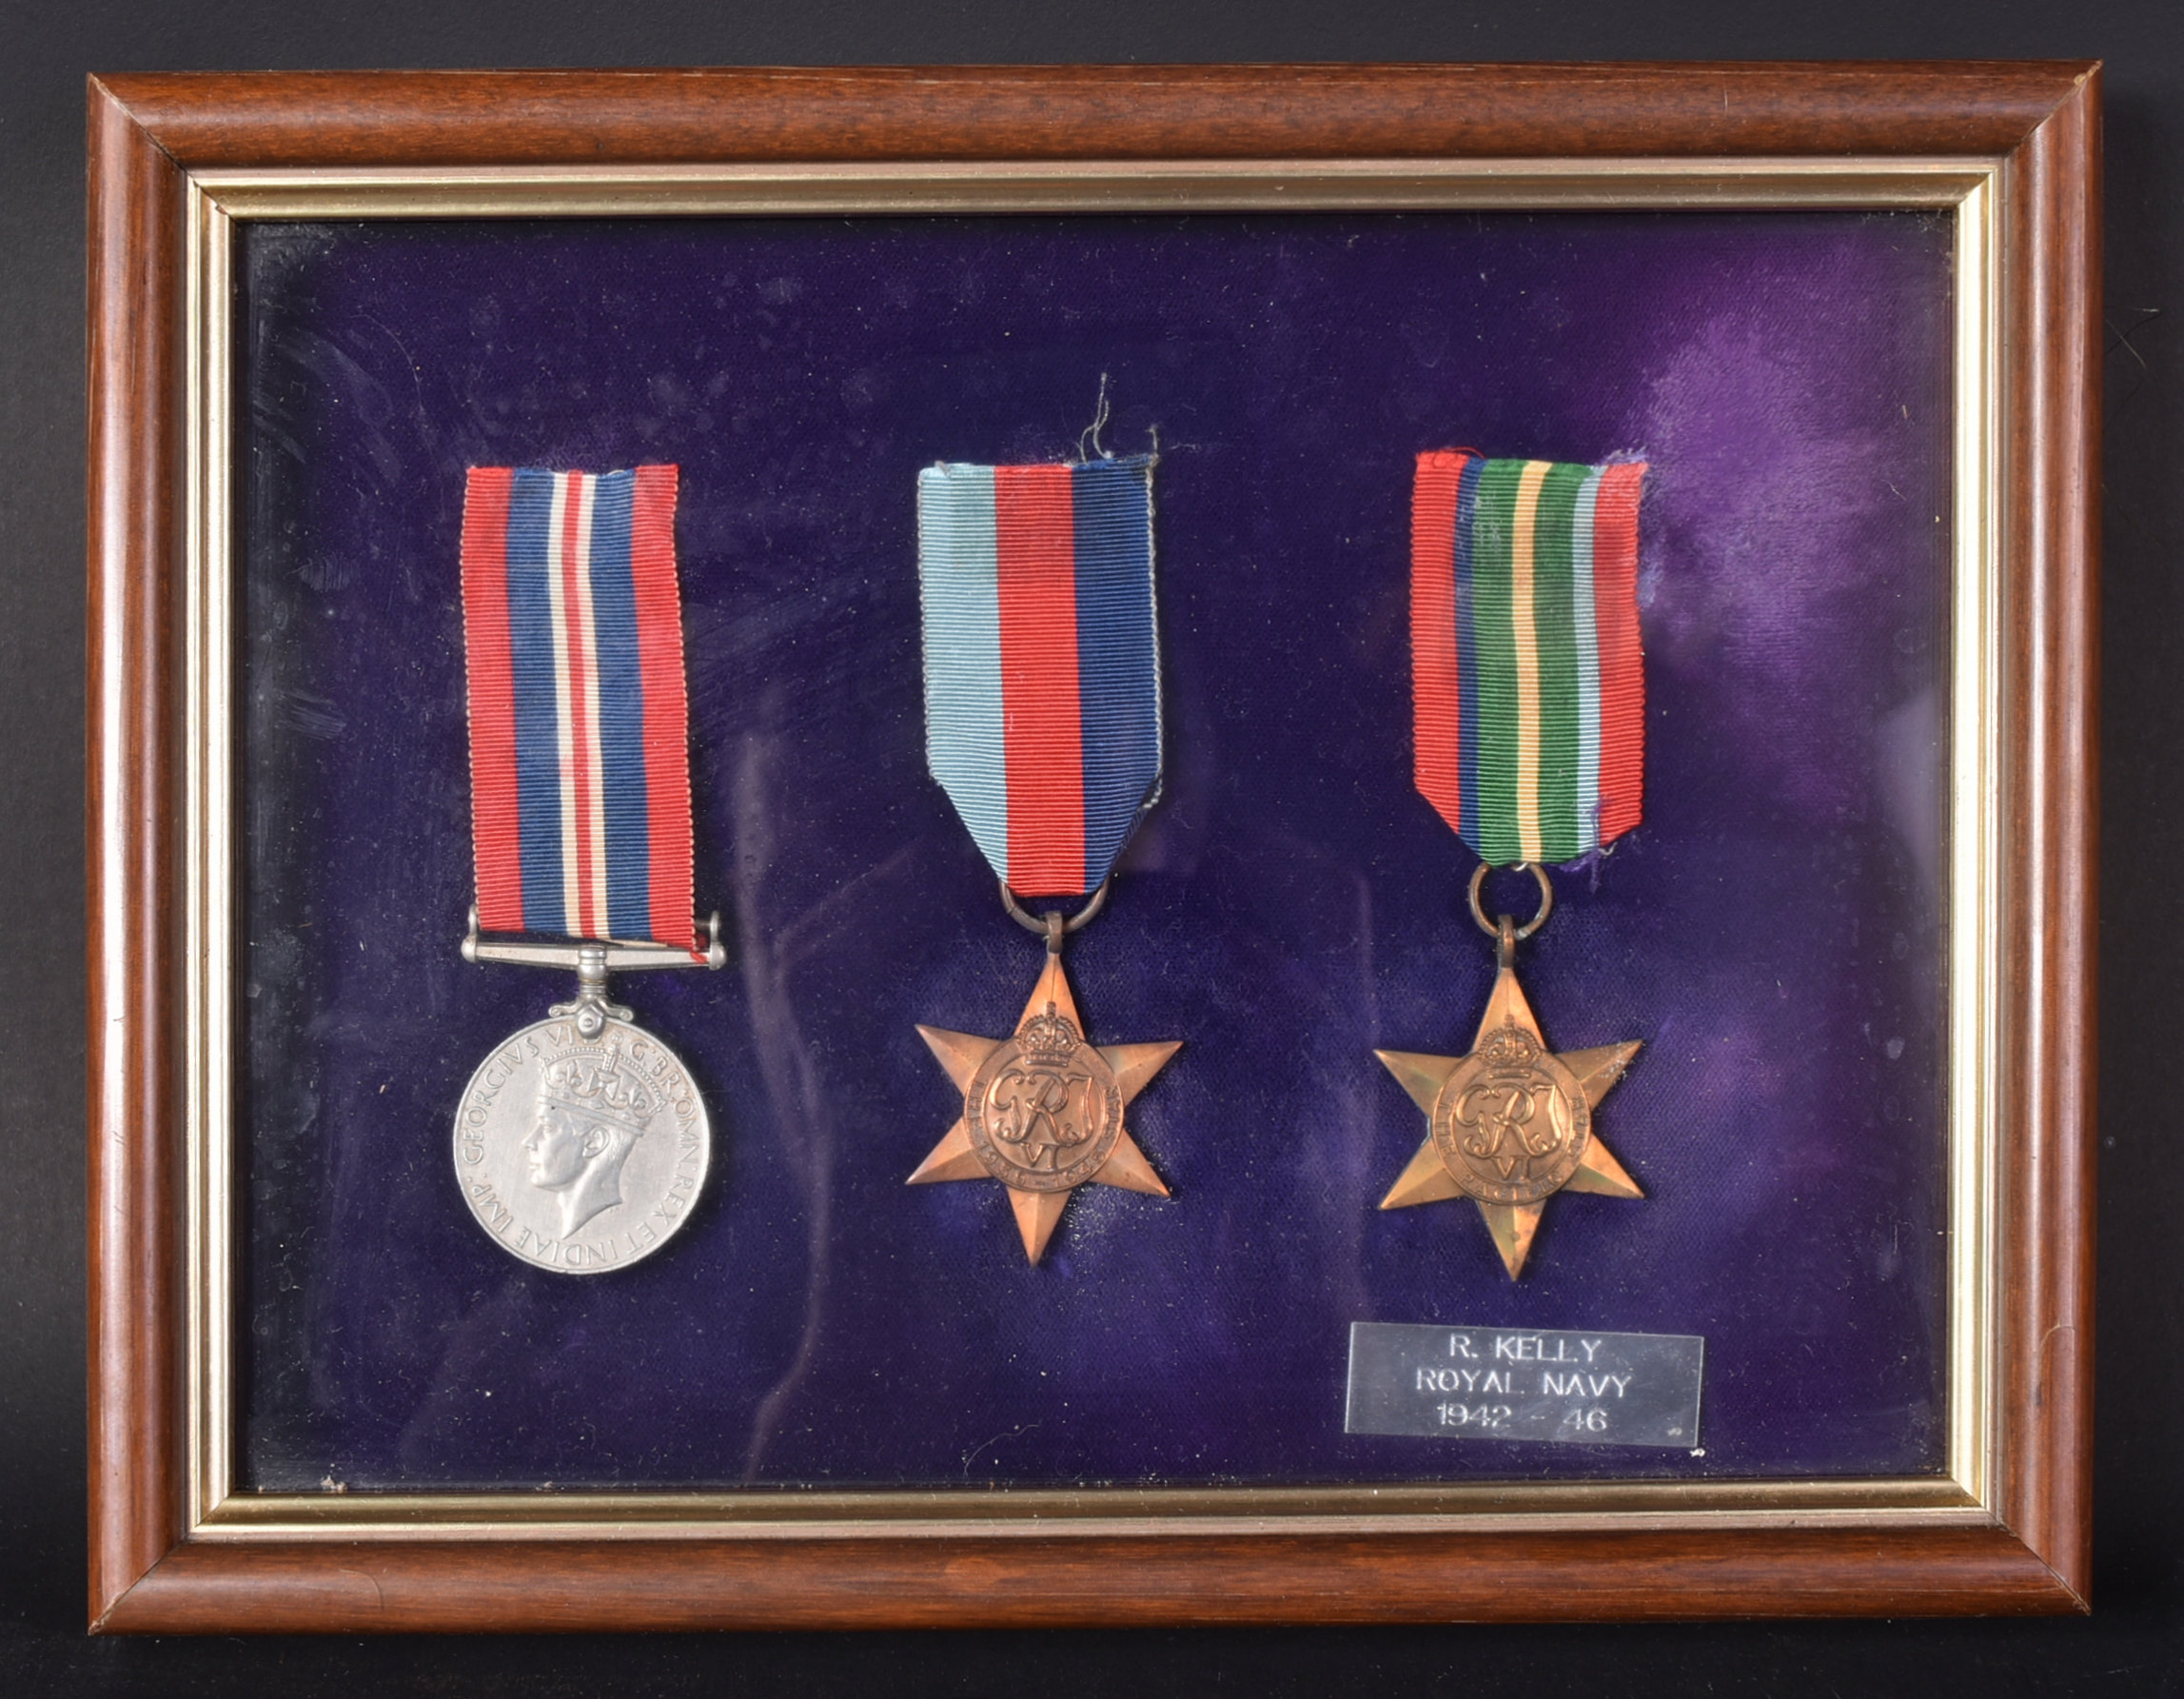 WWII SECOND WORLD WAR MEDAL TRIO - R. KELLY ROYAL NAVY - Image 2 of 8